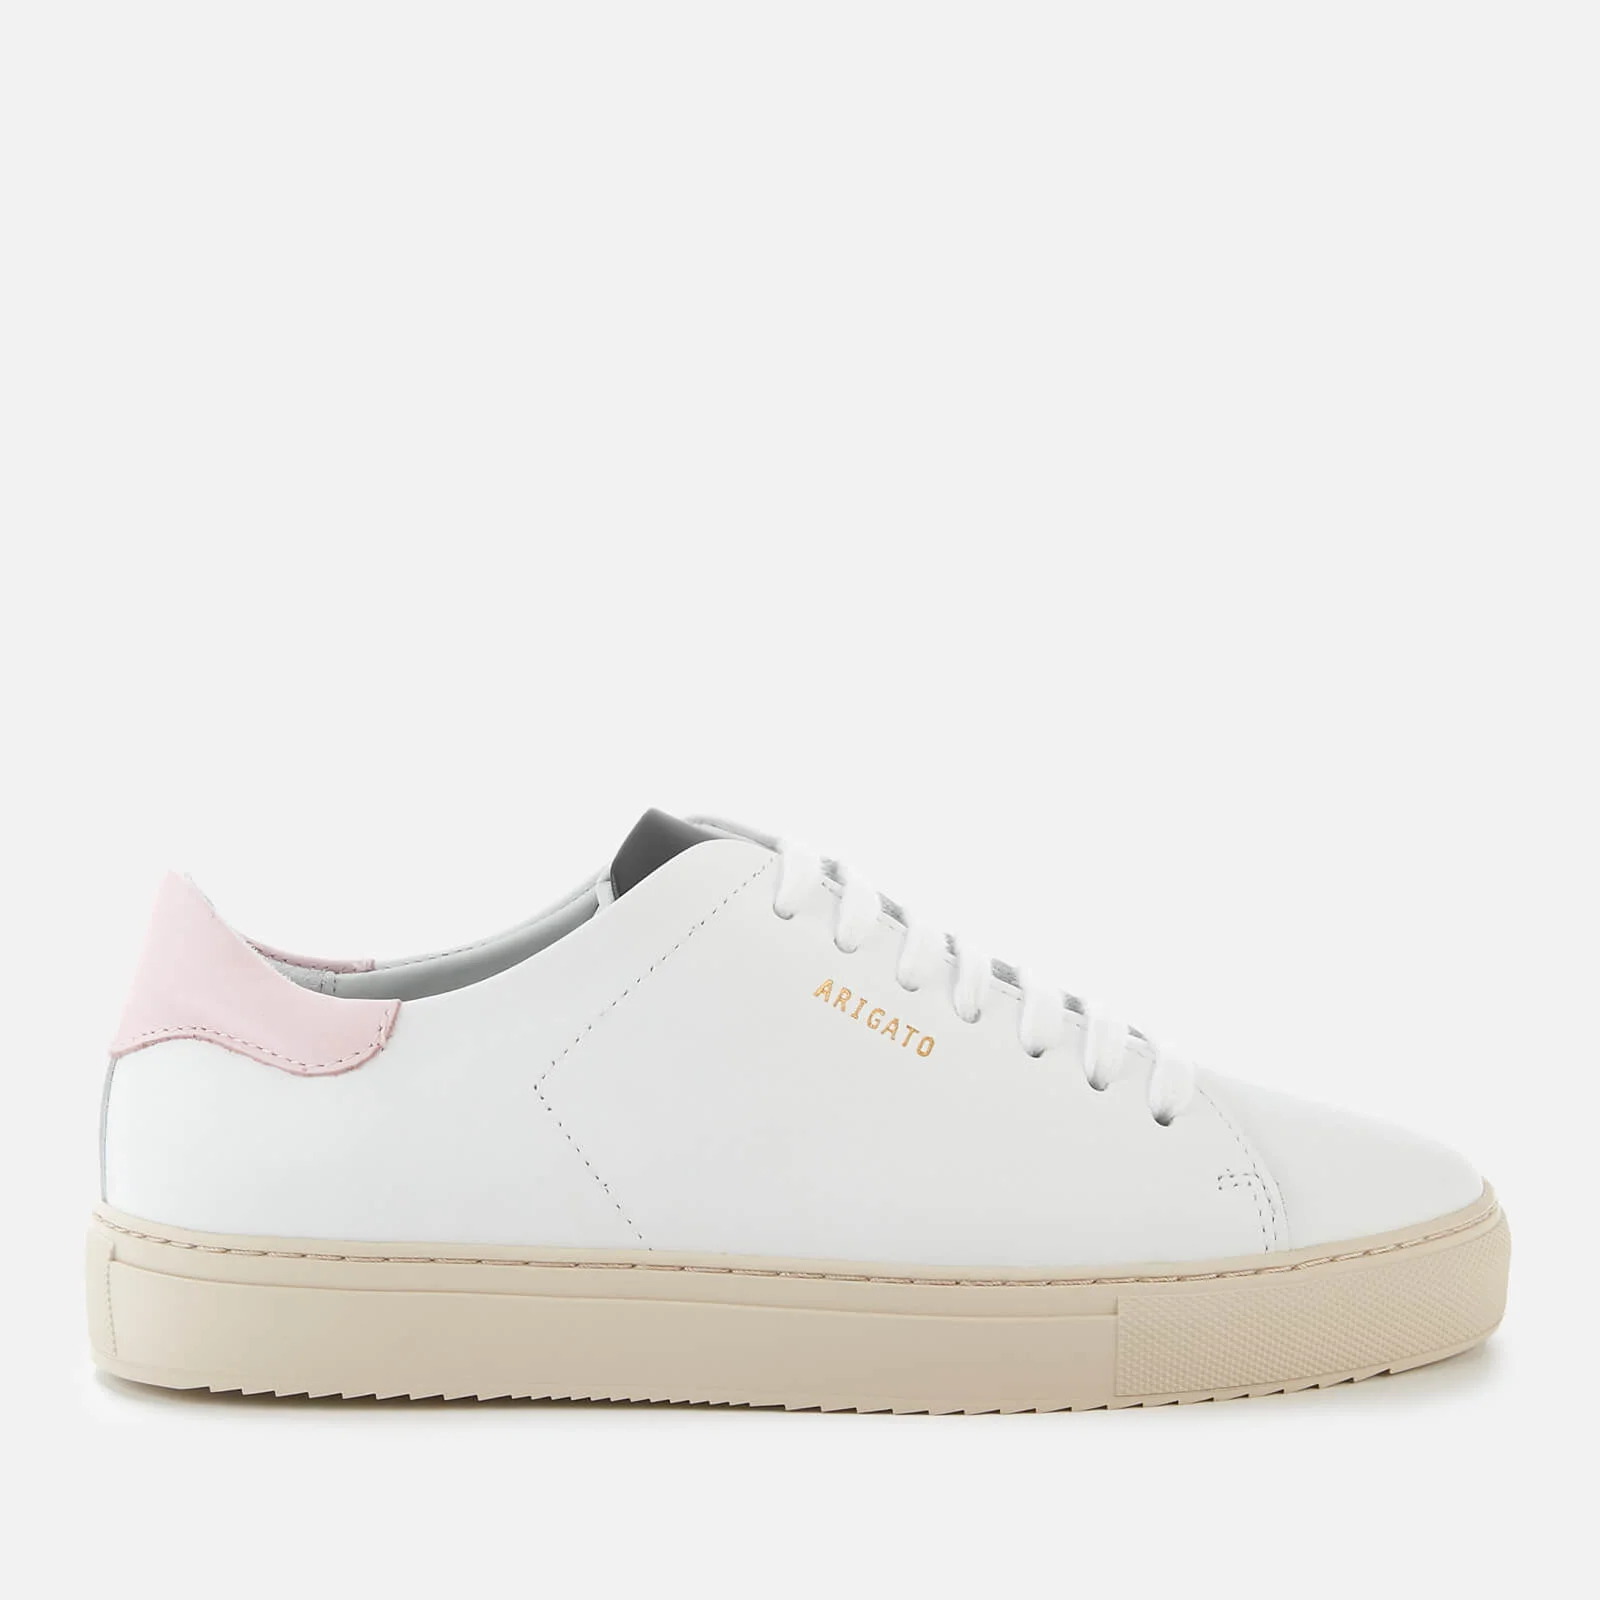 Axel Arigato Women's Clean 90 Leather Trainers - White/Light Pink Image 1